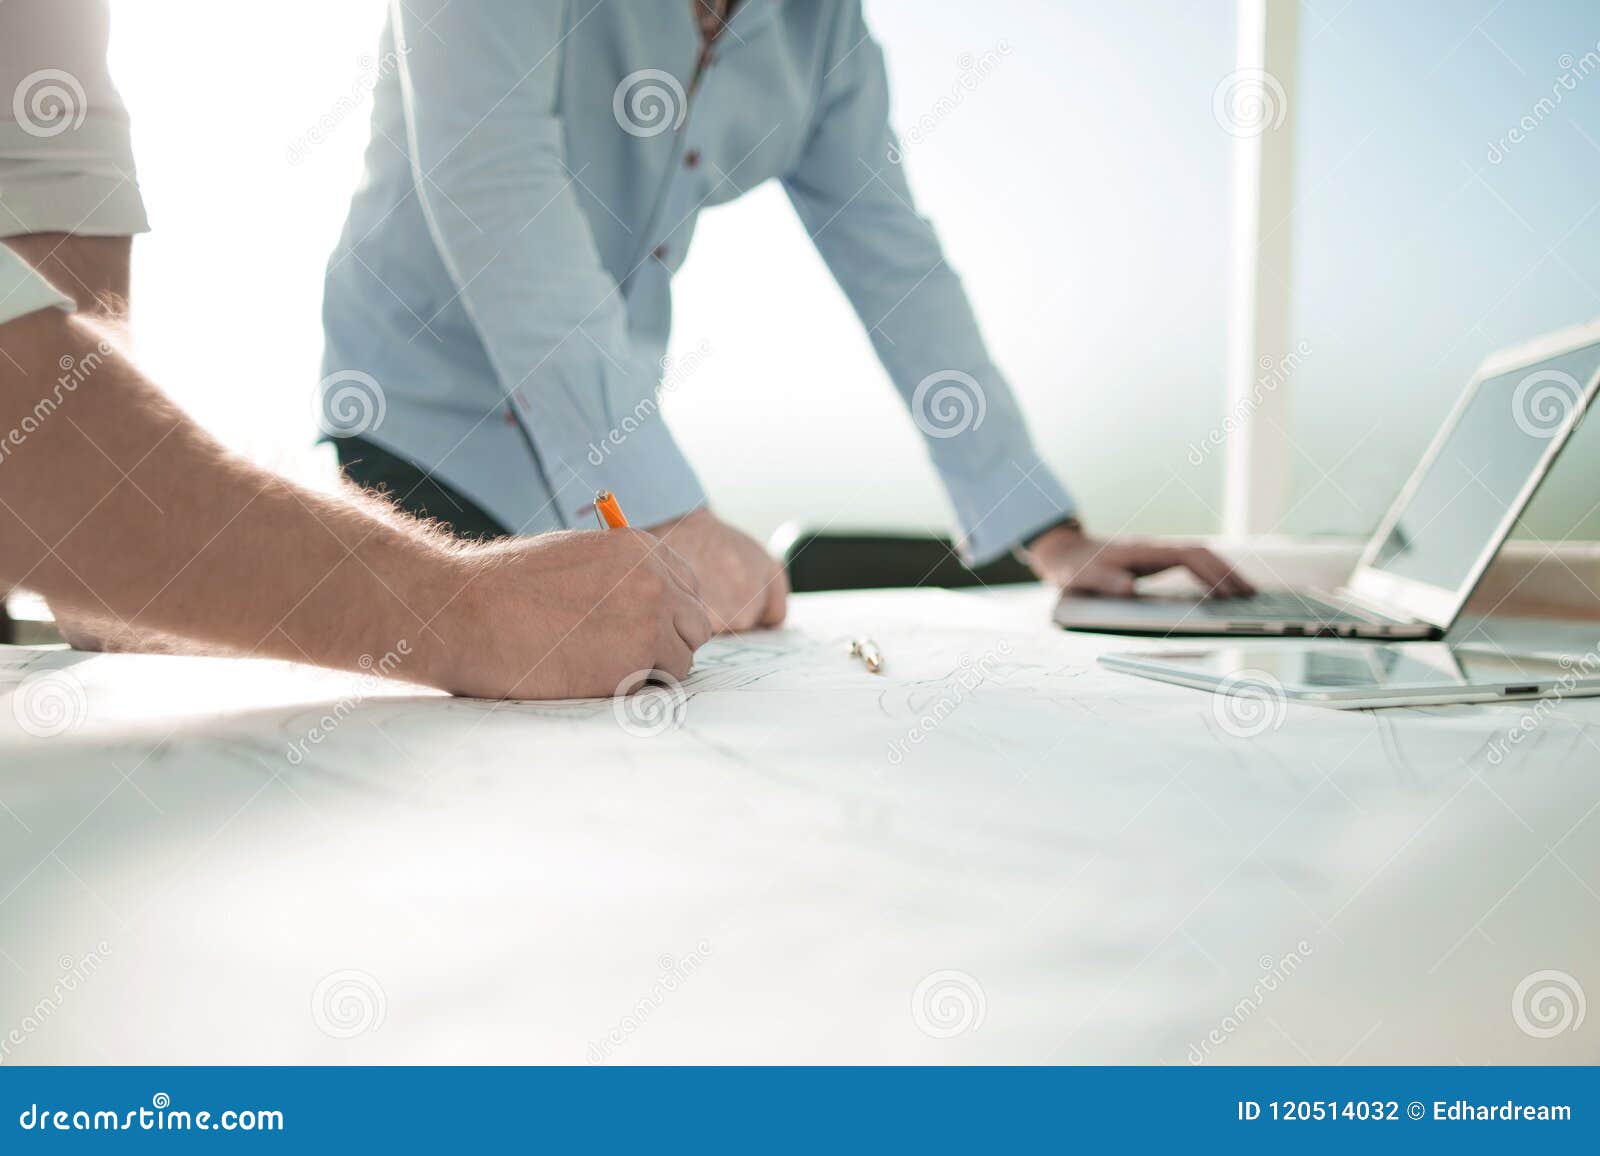 Background Image Of Architects Standing At The Desk Stock Photo